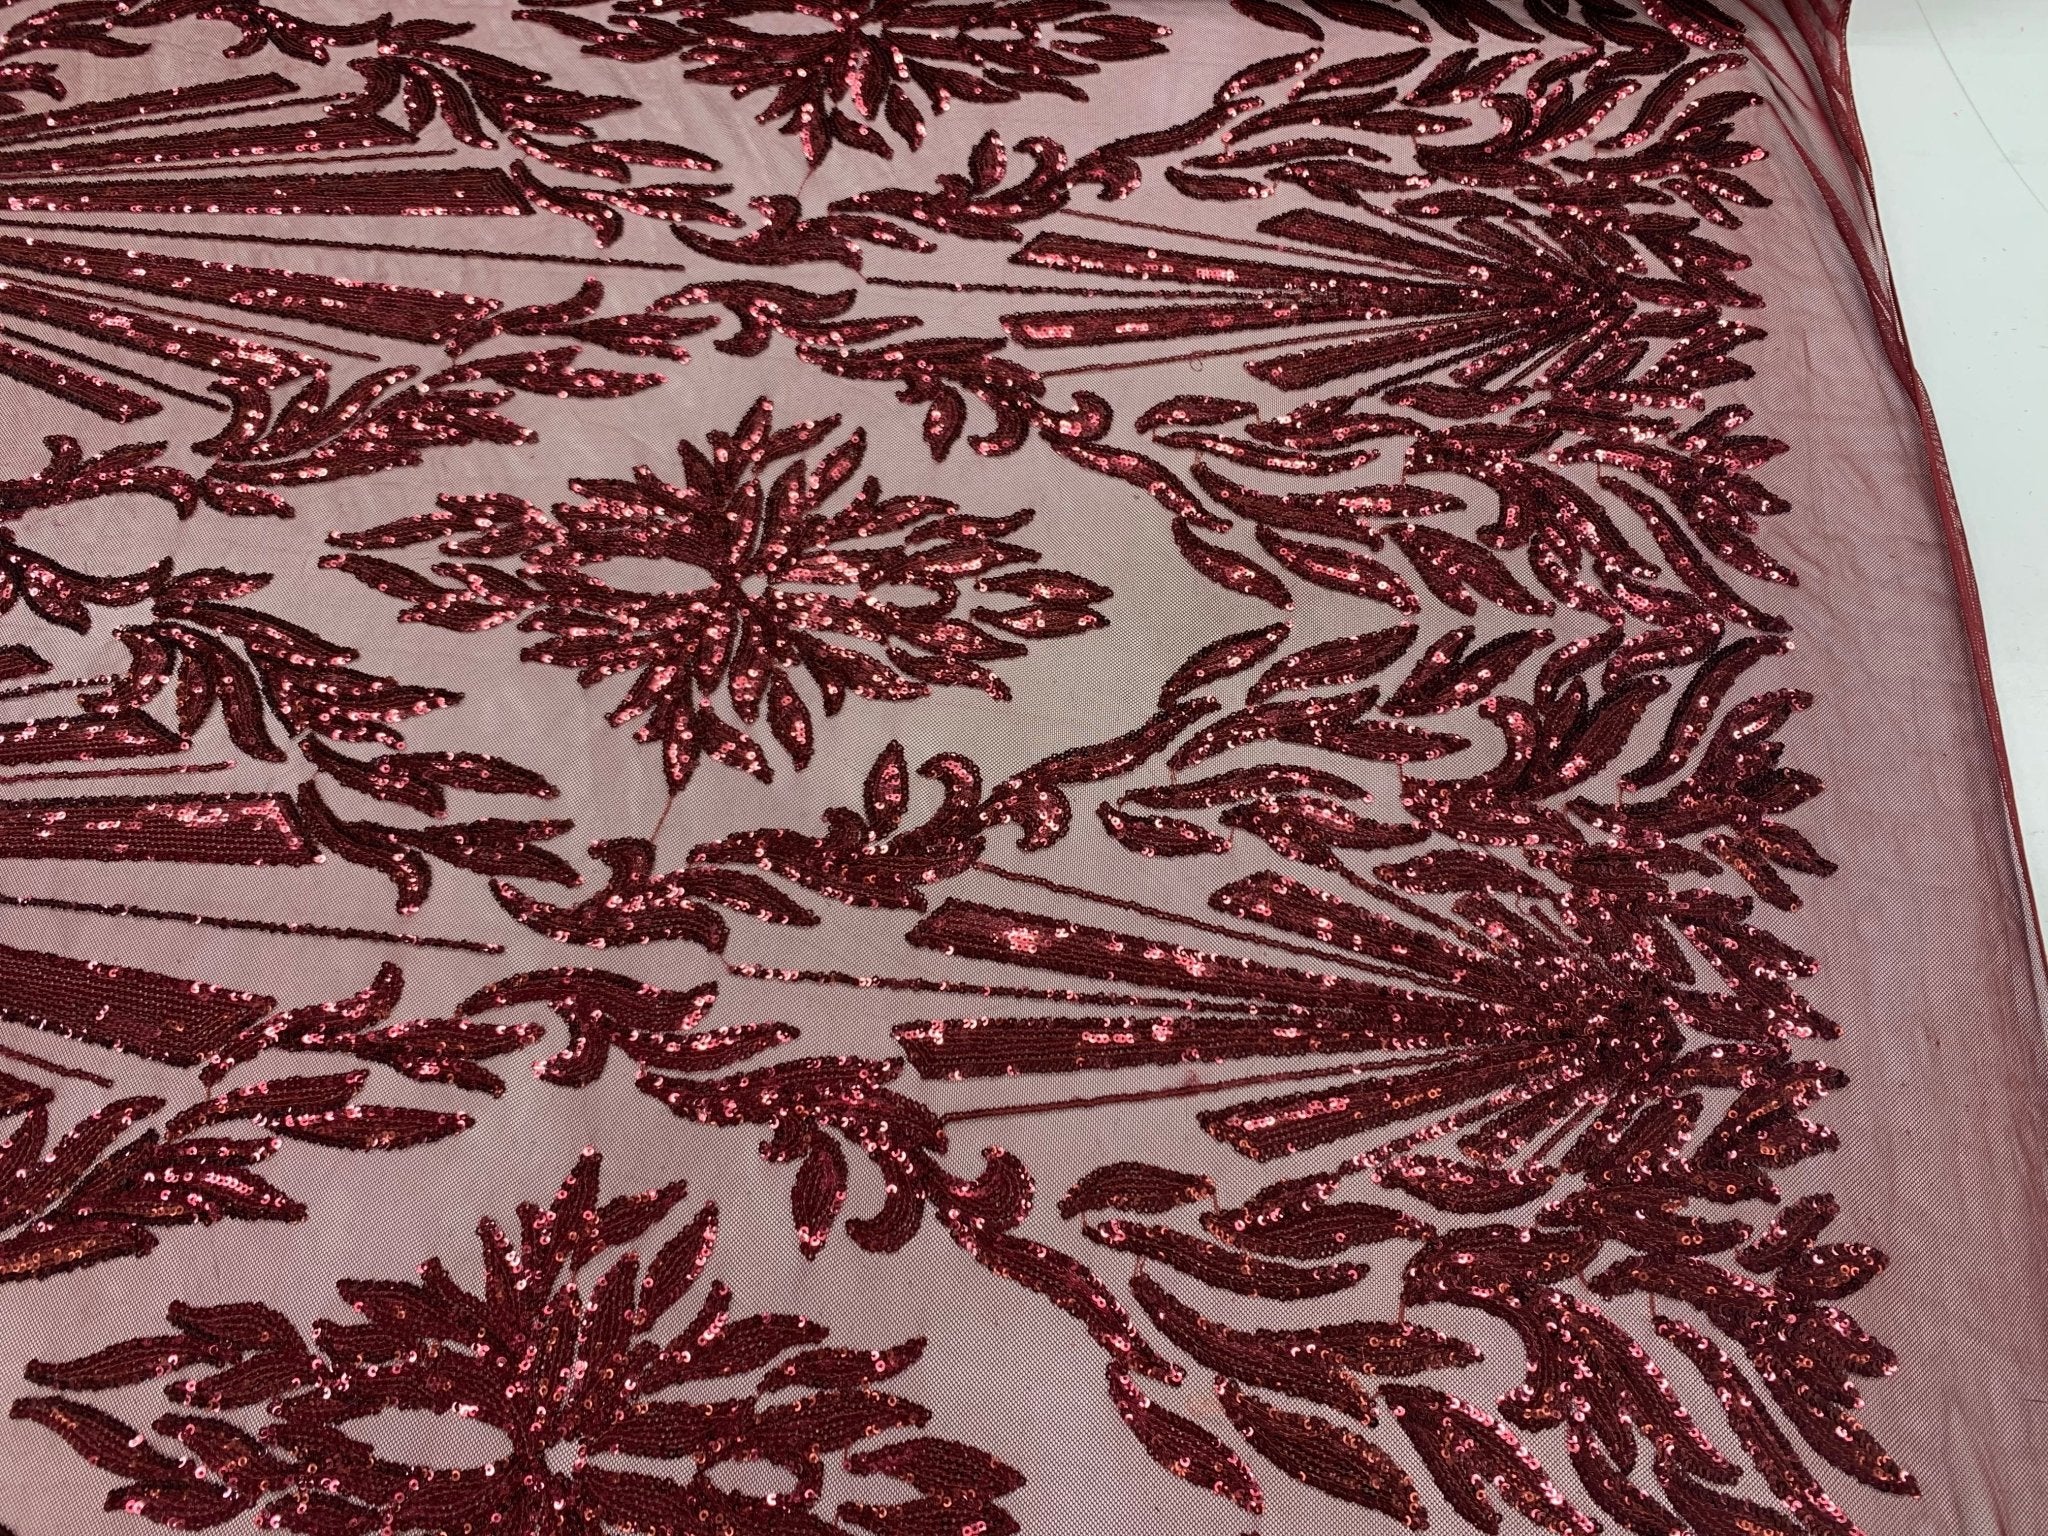 French Embroidery Stretch Sequins Fabric By The Yard on a Mesh LaceICEFABRICICE FABRICSBurgundyFrench Embroidery Stretch Sequins Fabric By The Yard on a Mesh Lace ICEFABRIC Burgundy